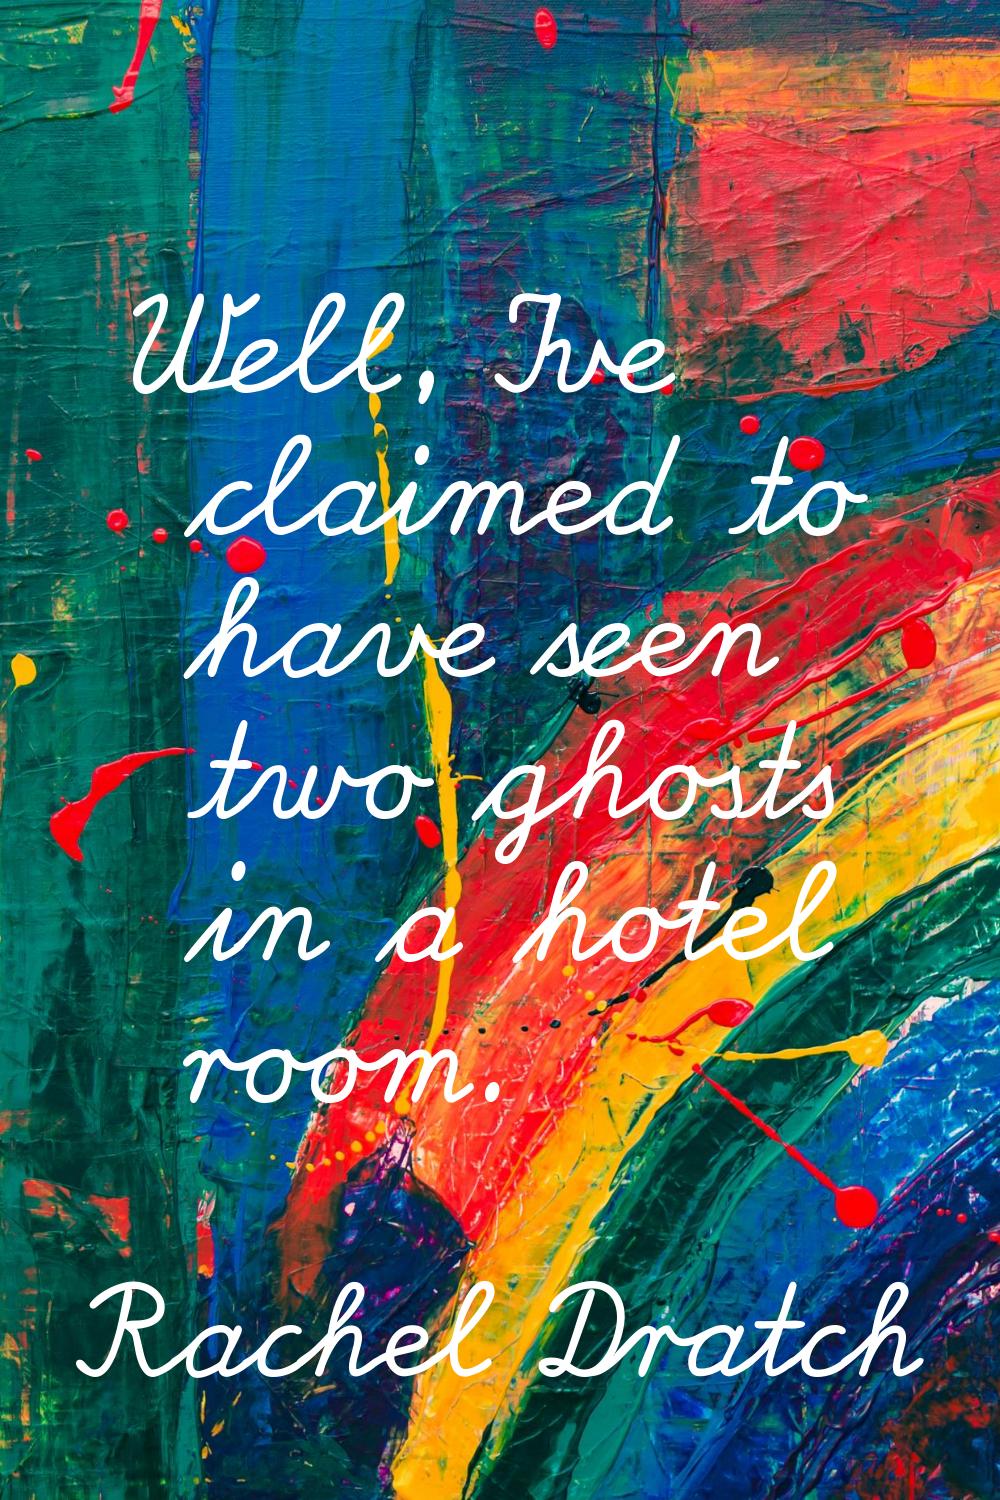 Well, I've claimed to have seen two ghosts in a hotel room.